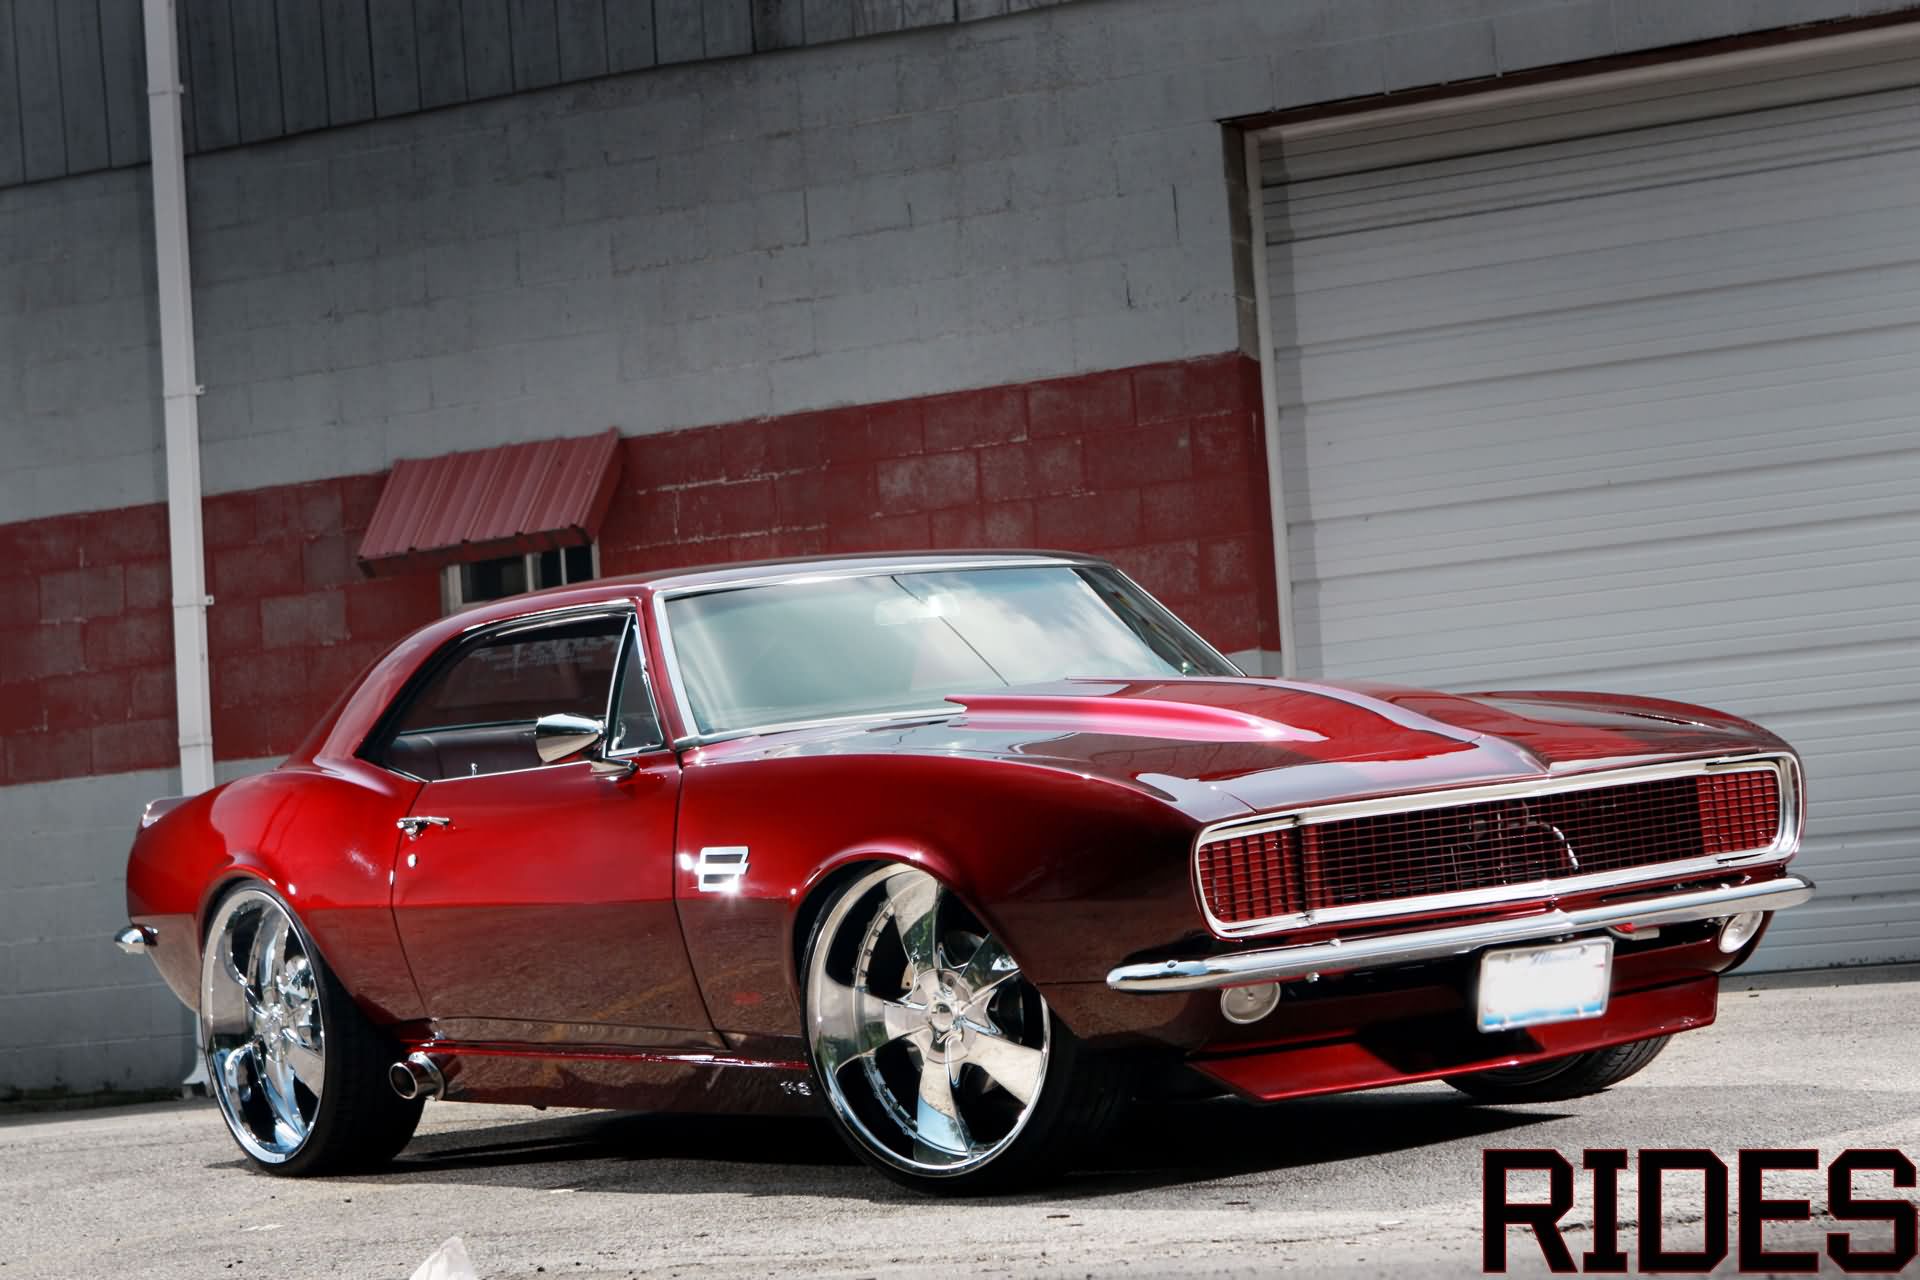 Candy Apple Red Camaro Muscle Car - Images, Photos, Pictures